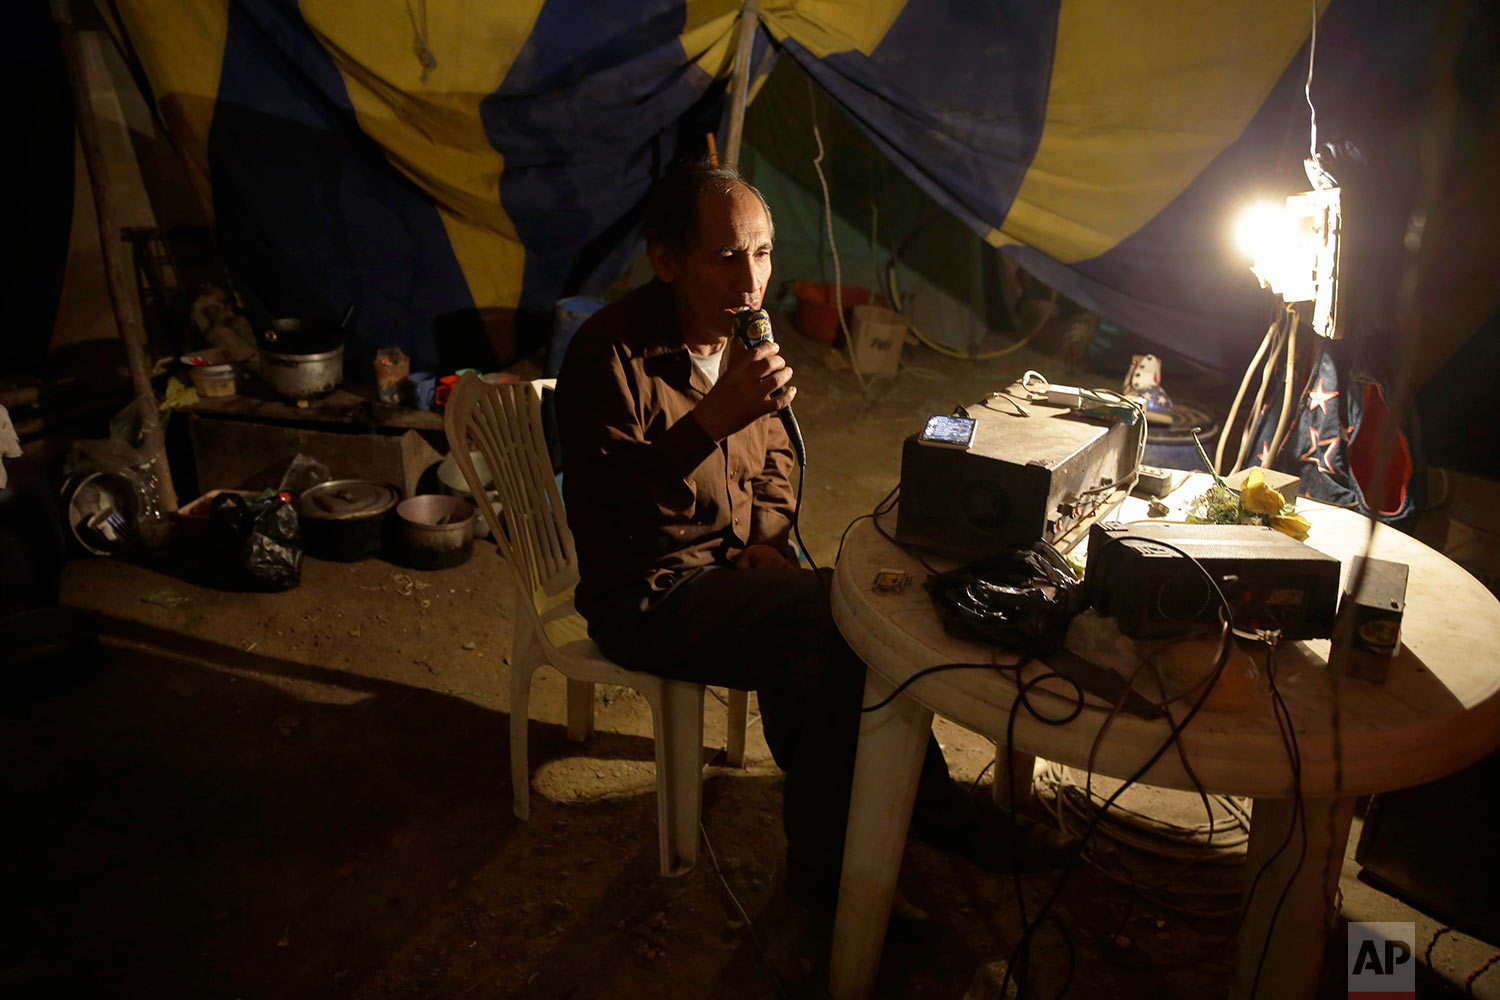  Circus owner and clown Jose Alvarez talks into a loud speaker system to announce the soon-to-start opening act, from the circus tent set up in the shantytown of Puente Piedra on the outskirts of Lima, Peru, July 8, 2018. (AP Photo/Martin Mejia) 